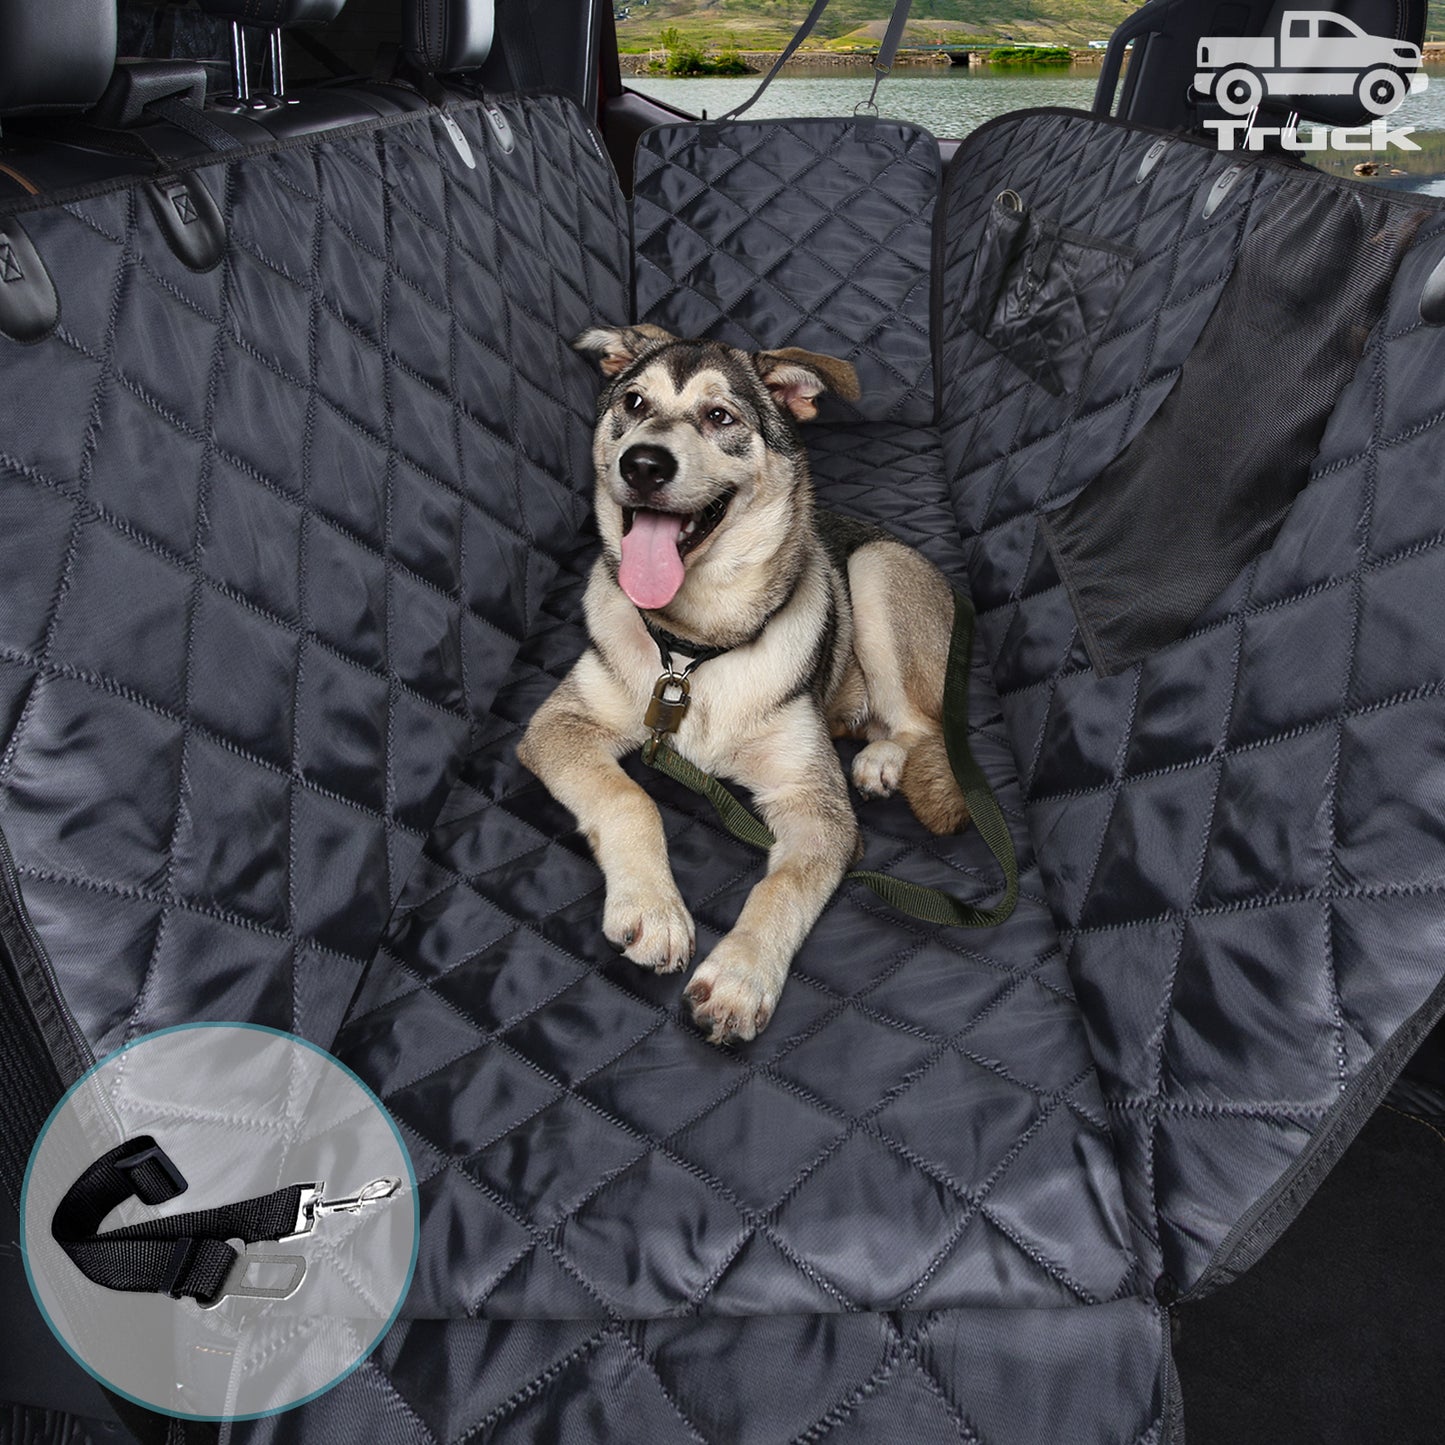 Comwish Dog Seat Cover for Truck with Mesh Window